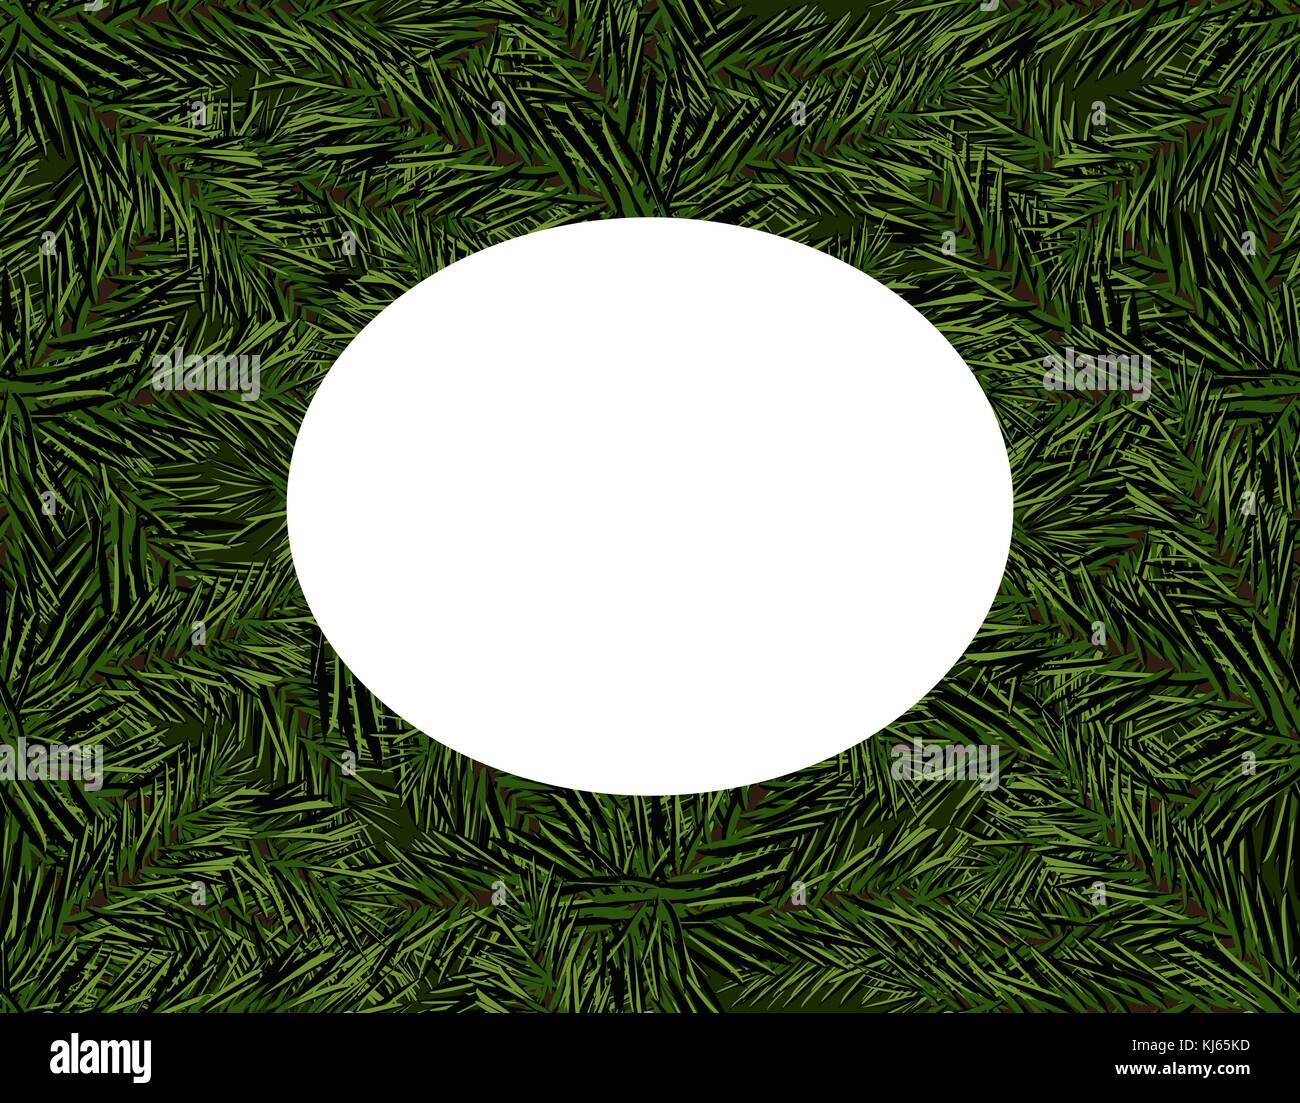 New Year Christmas. Green branches of the Christmas tree. Place for advertisements and announcements. Seamless. Isolated Illustration Stock Vector